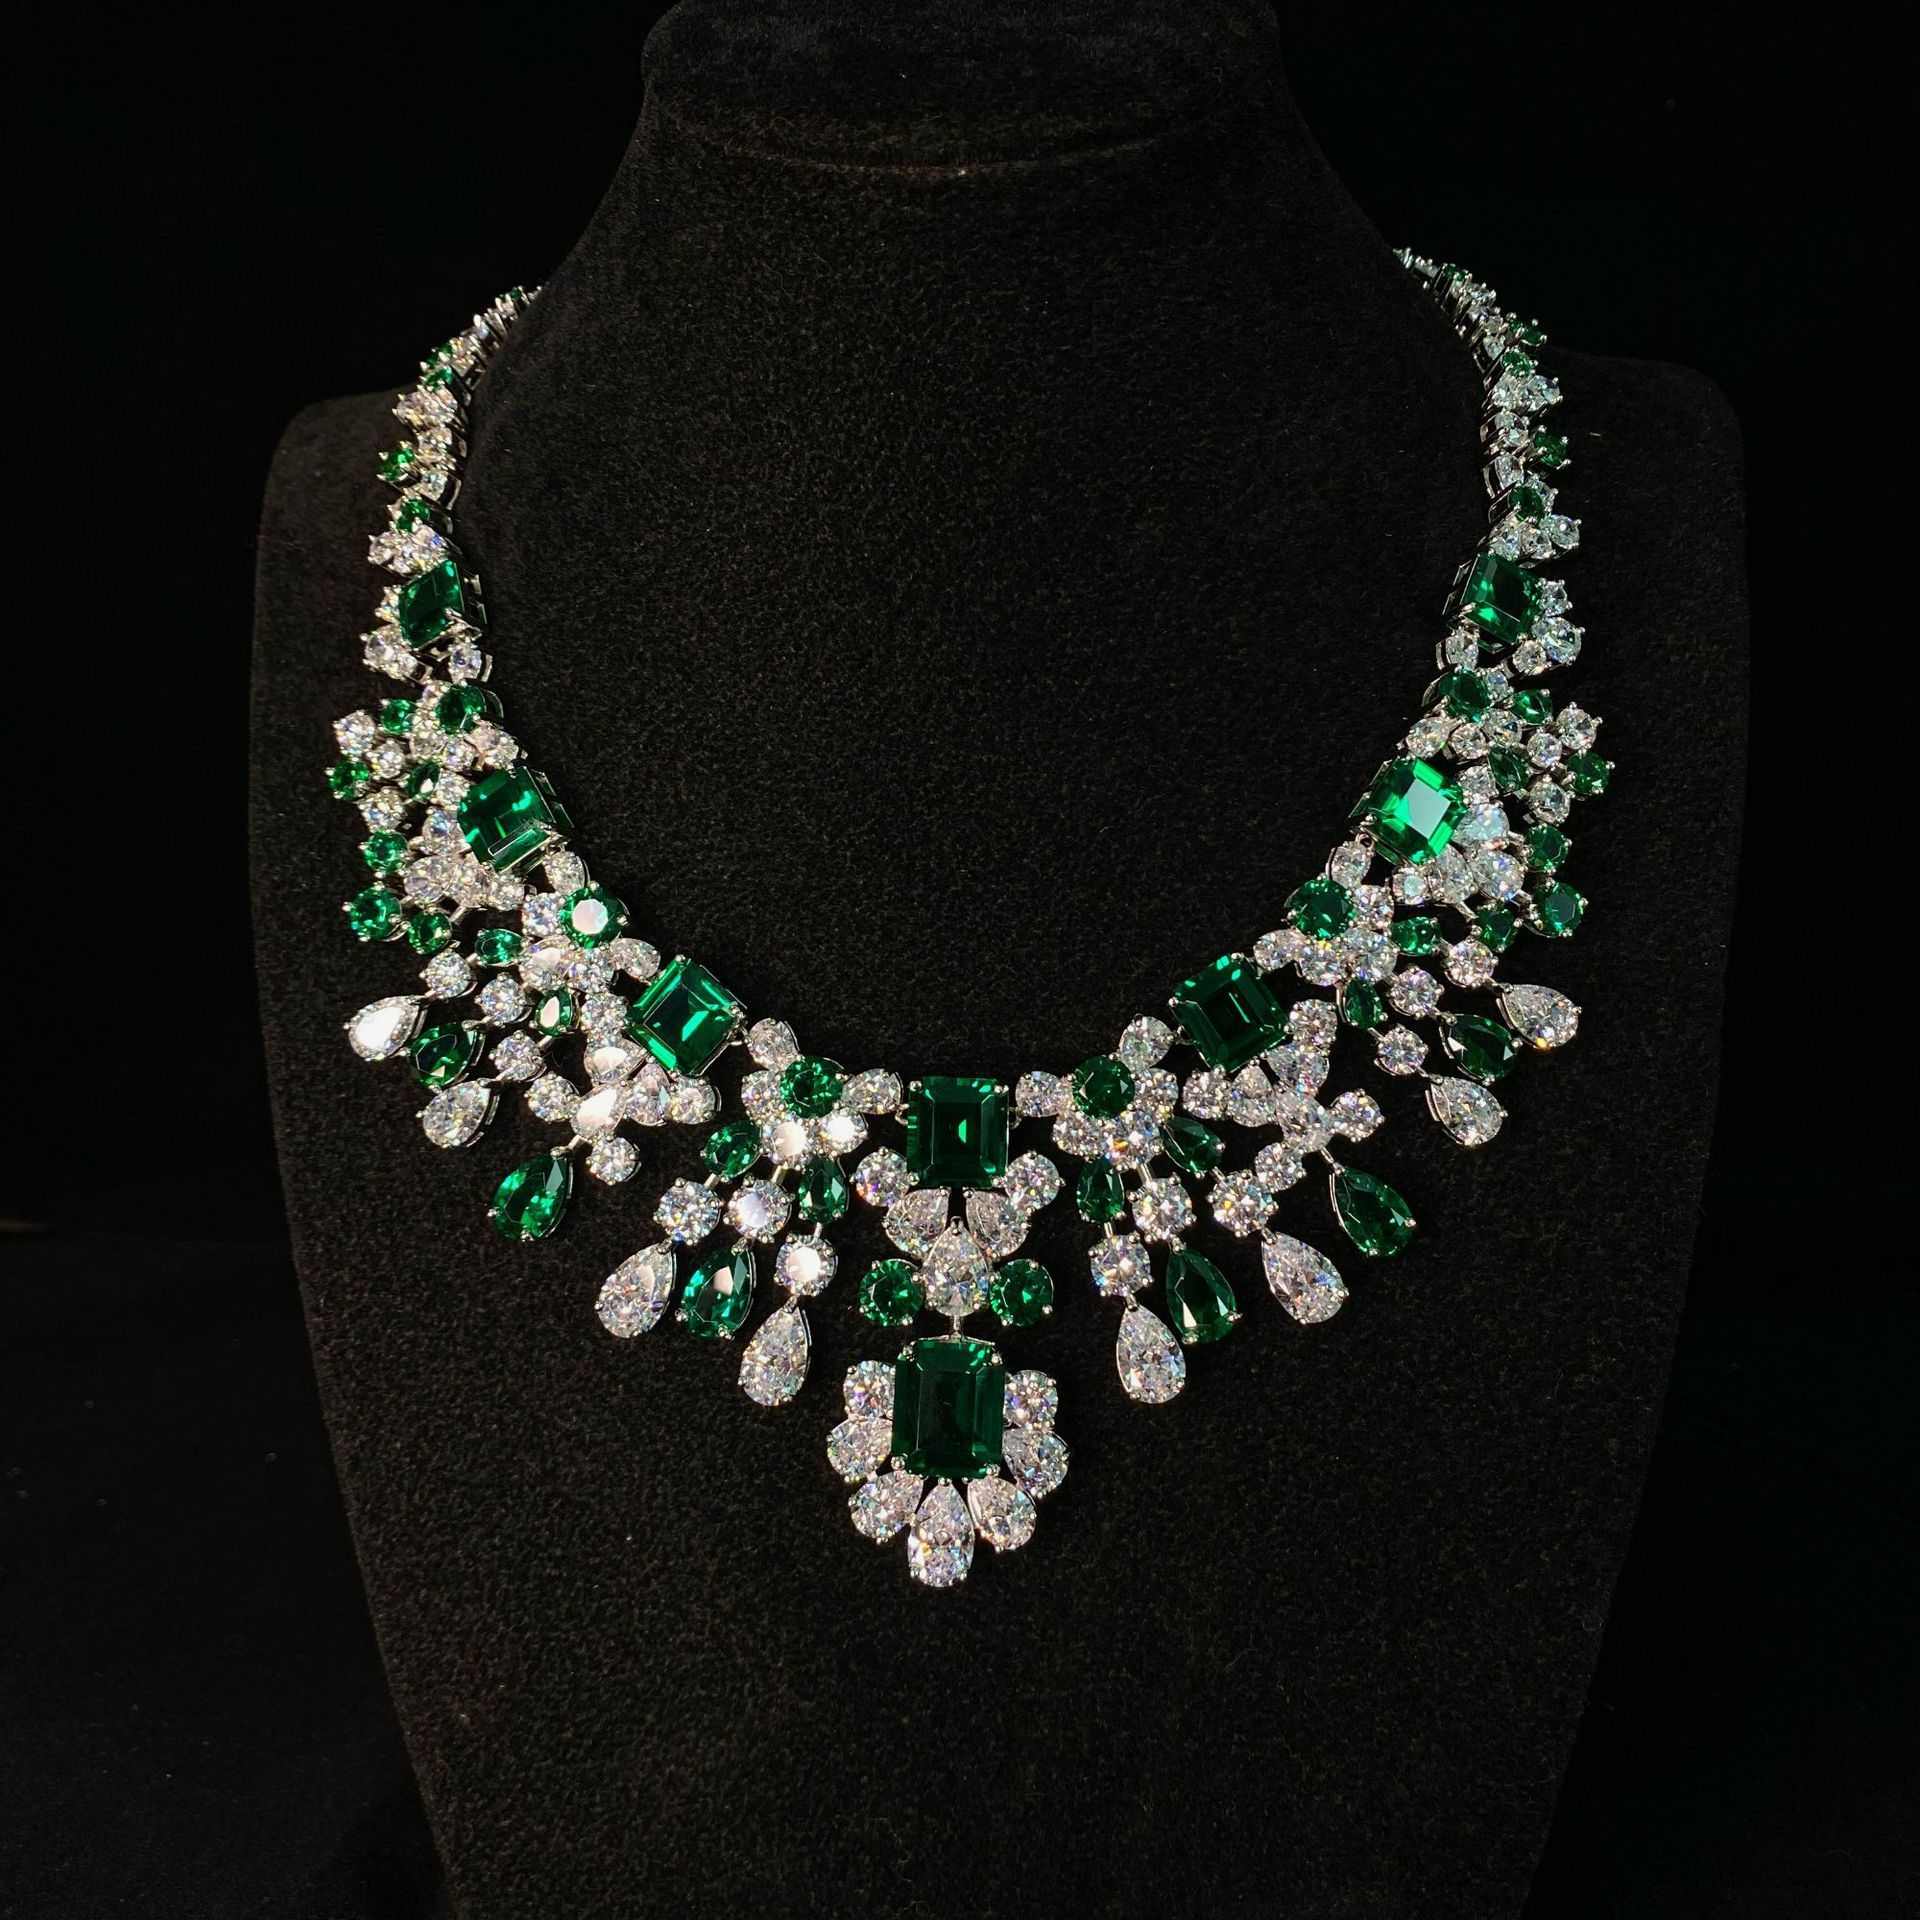 Emerald Statement Necklace - HERS